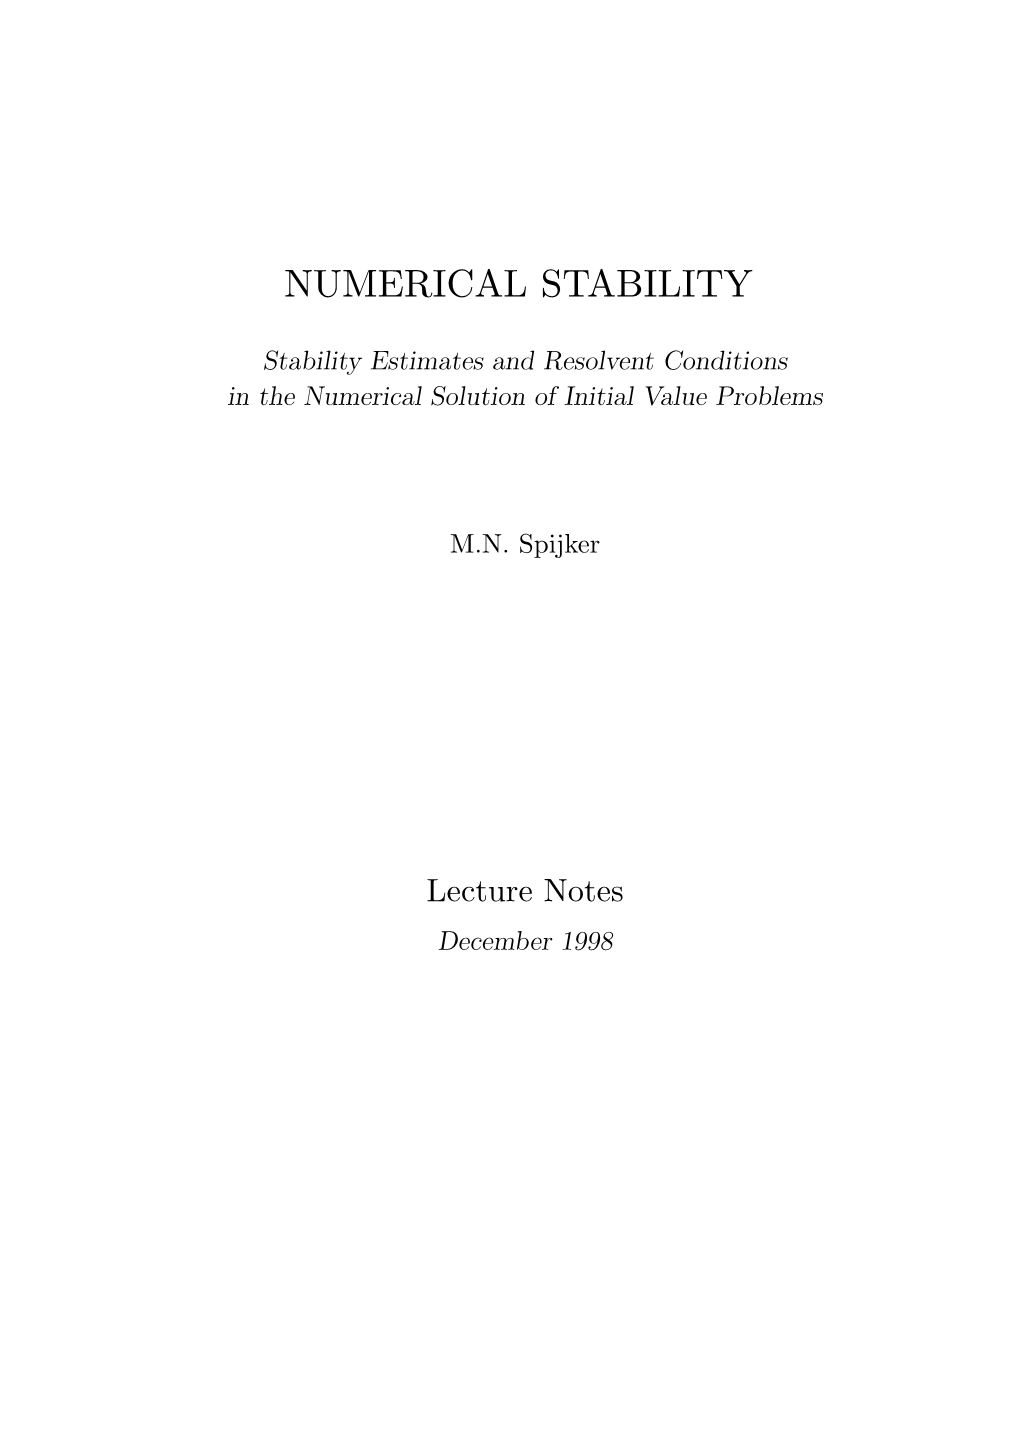 Stability Estimates and Resolvent Conditions in the Numerical Solution of Initial Value Problems